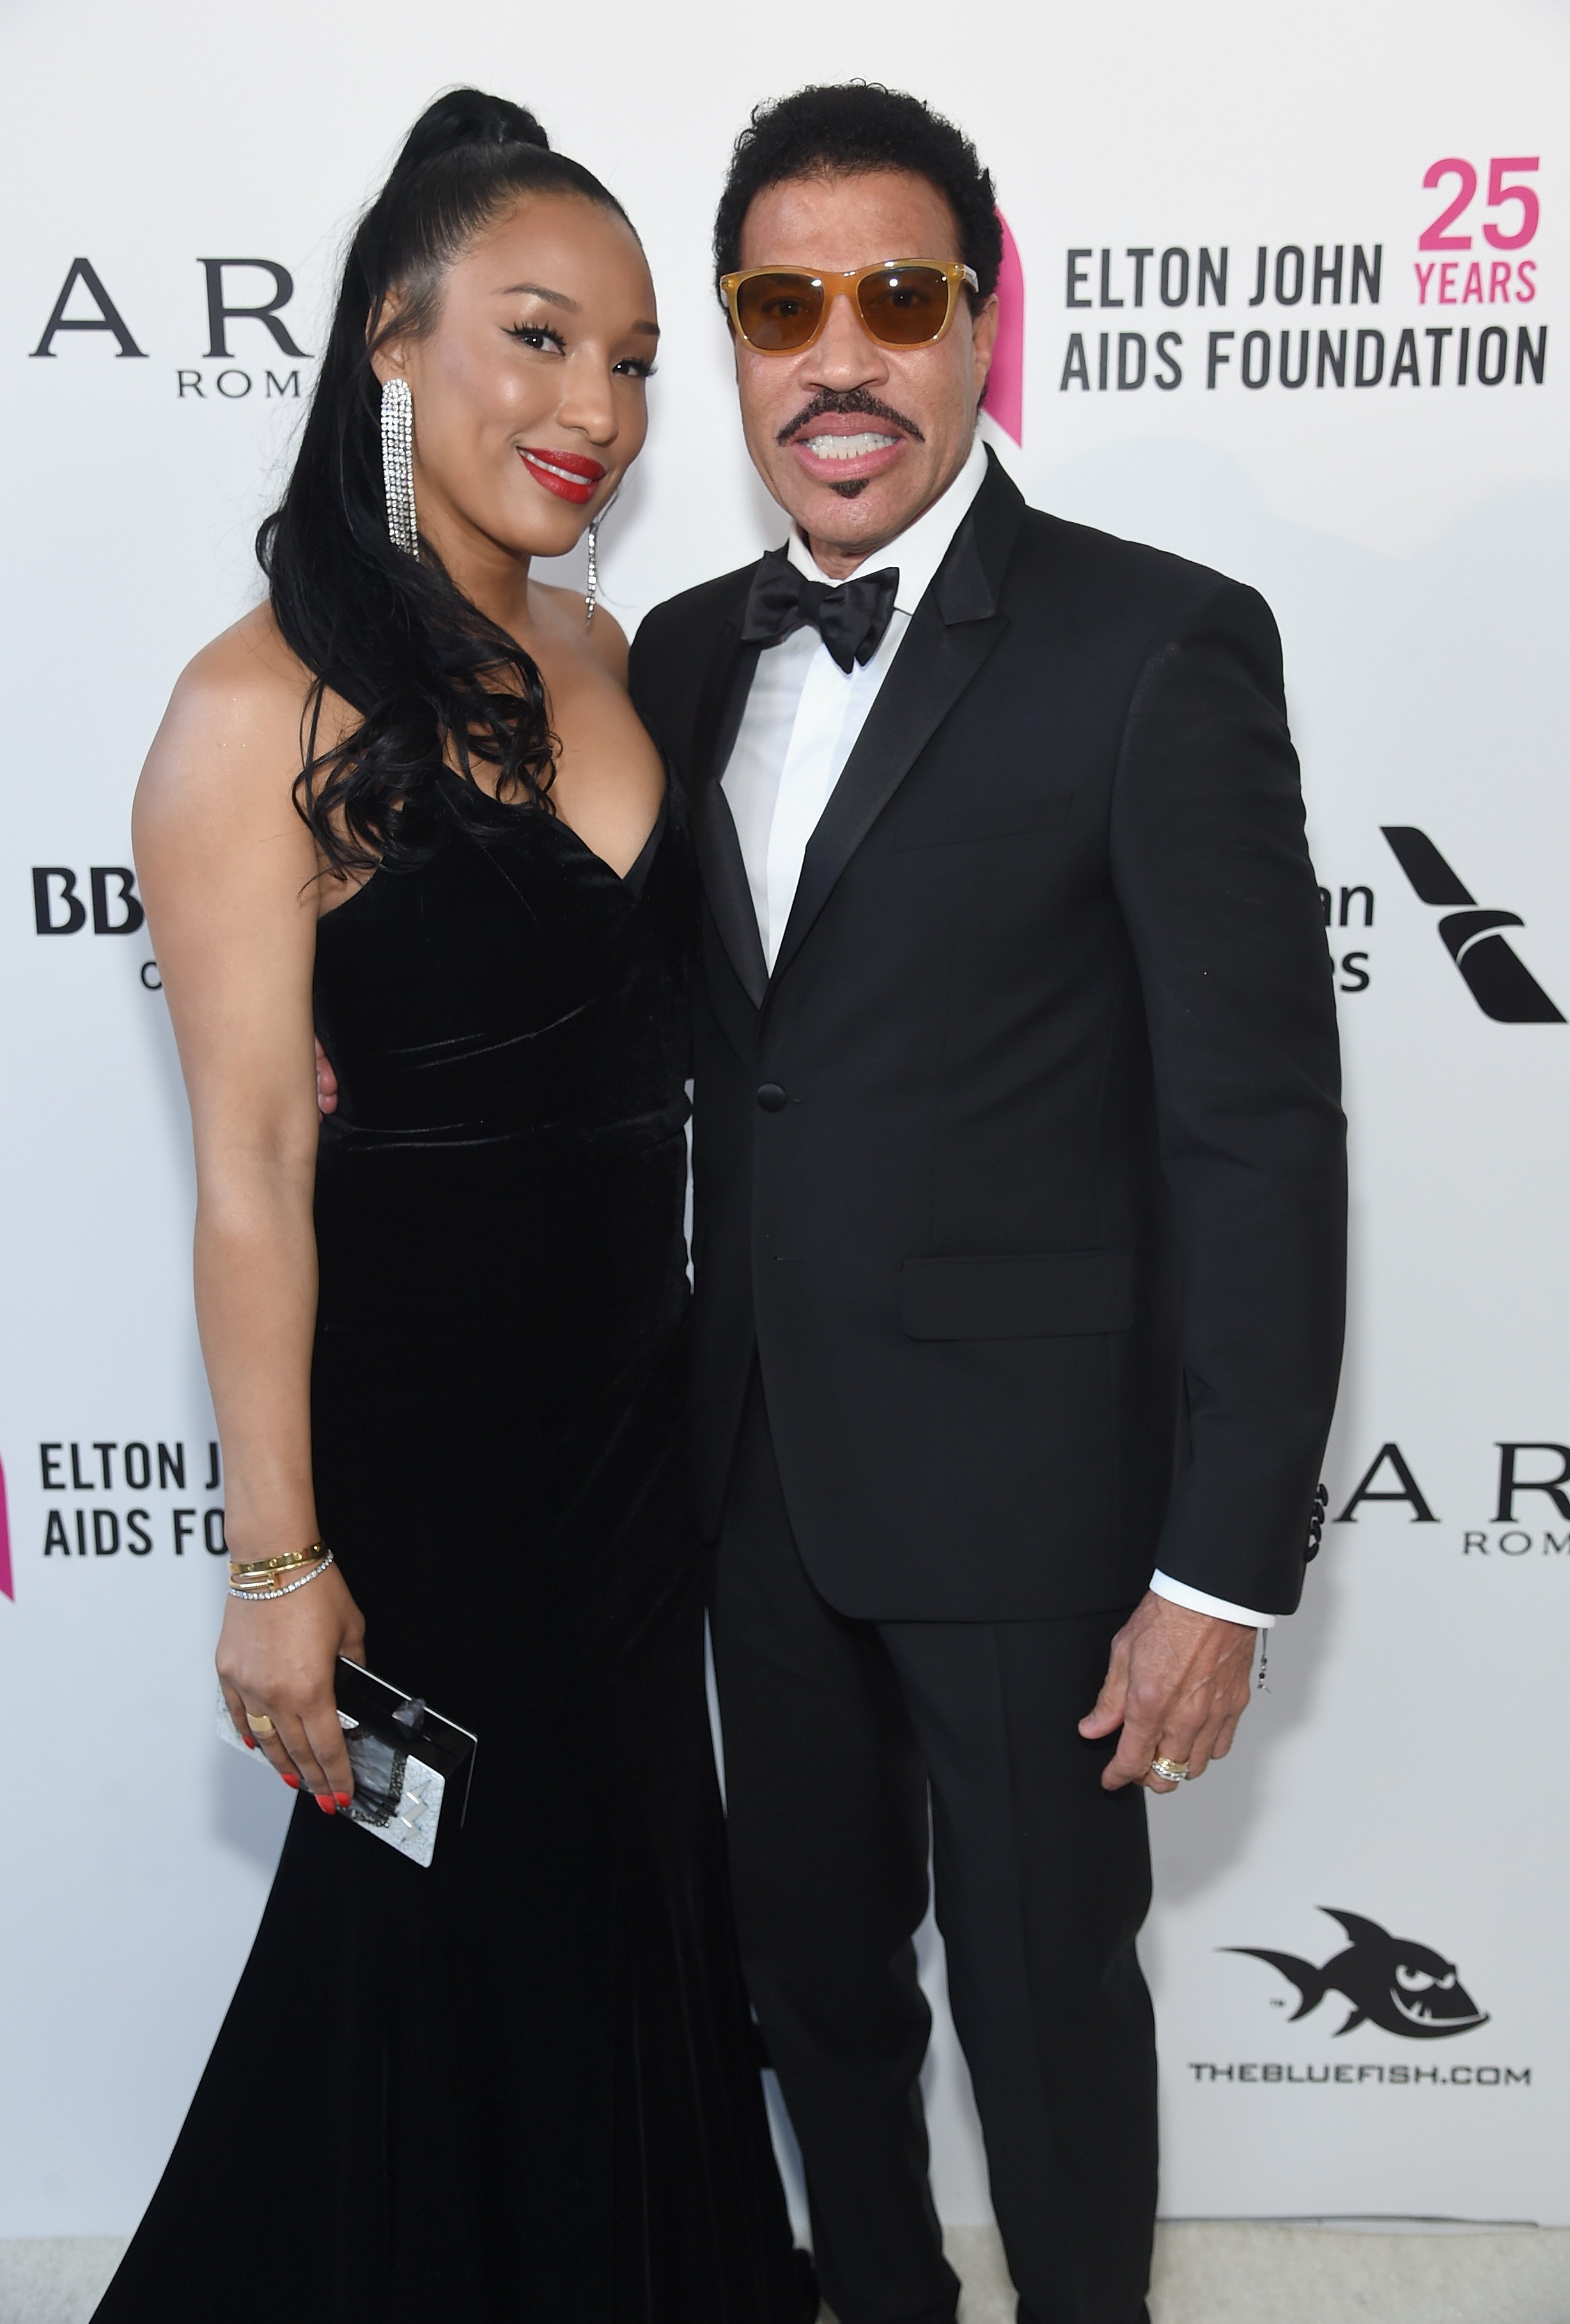 Lisa Parigi and Lionel Richie at the 26th annual Elton John AIDS Foundation Academy Awards Viewing Party in March 2018. | Photo: GettyImages